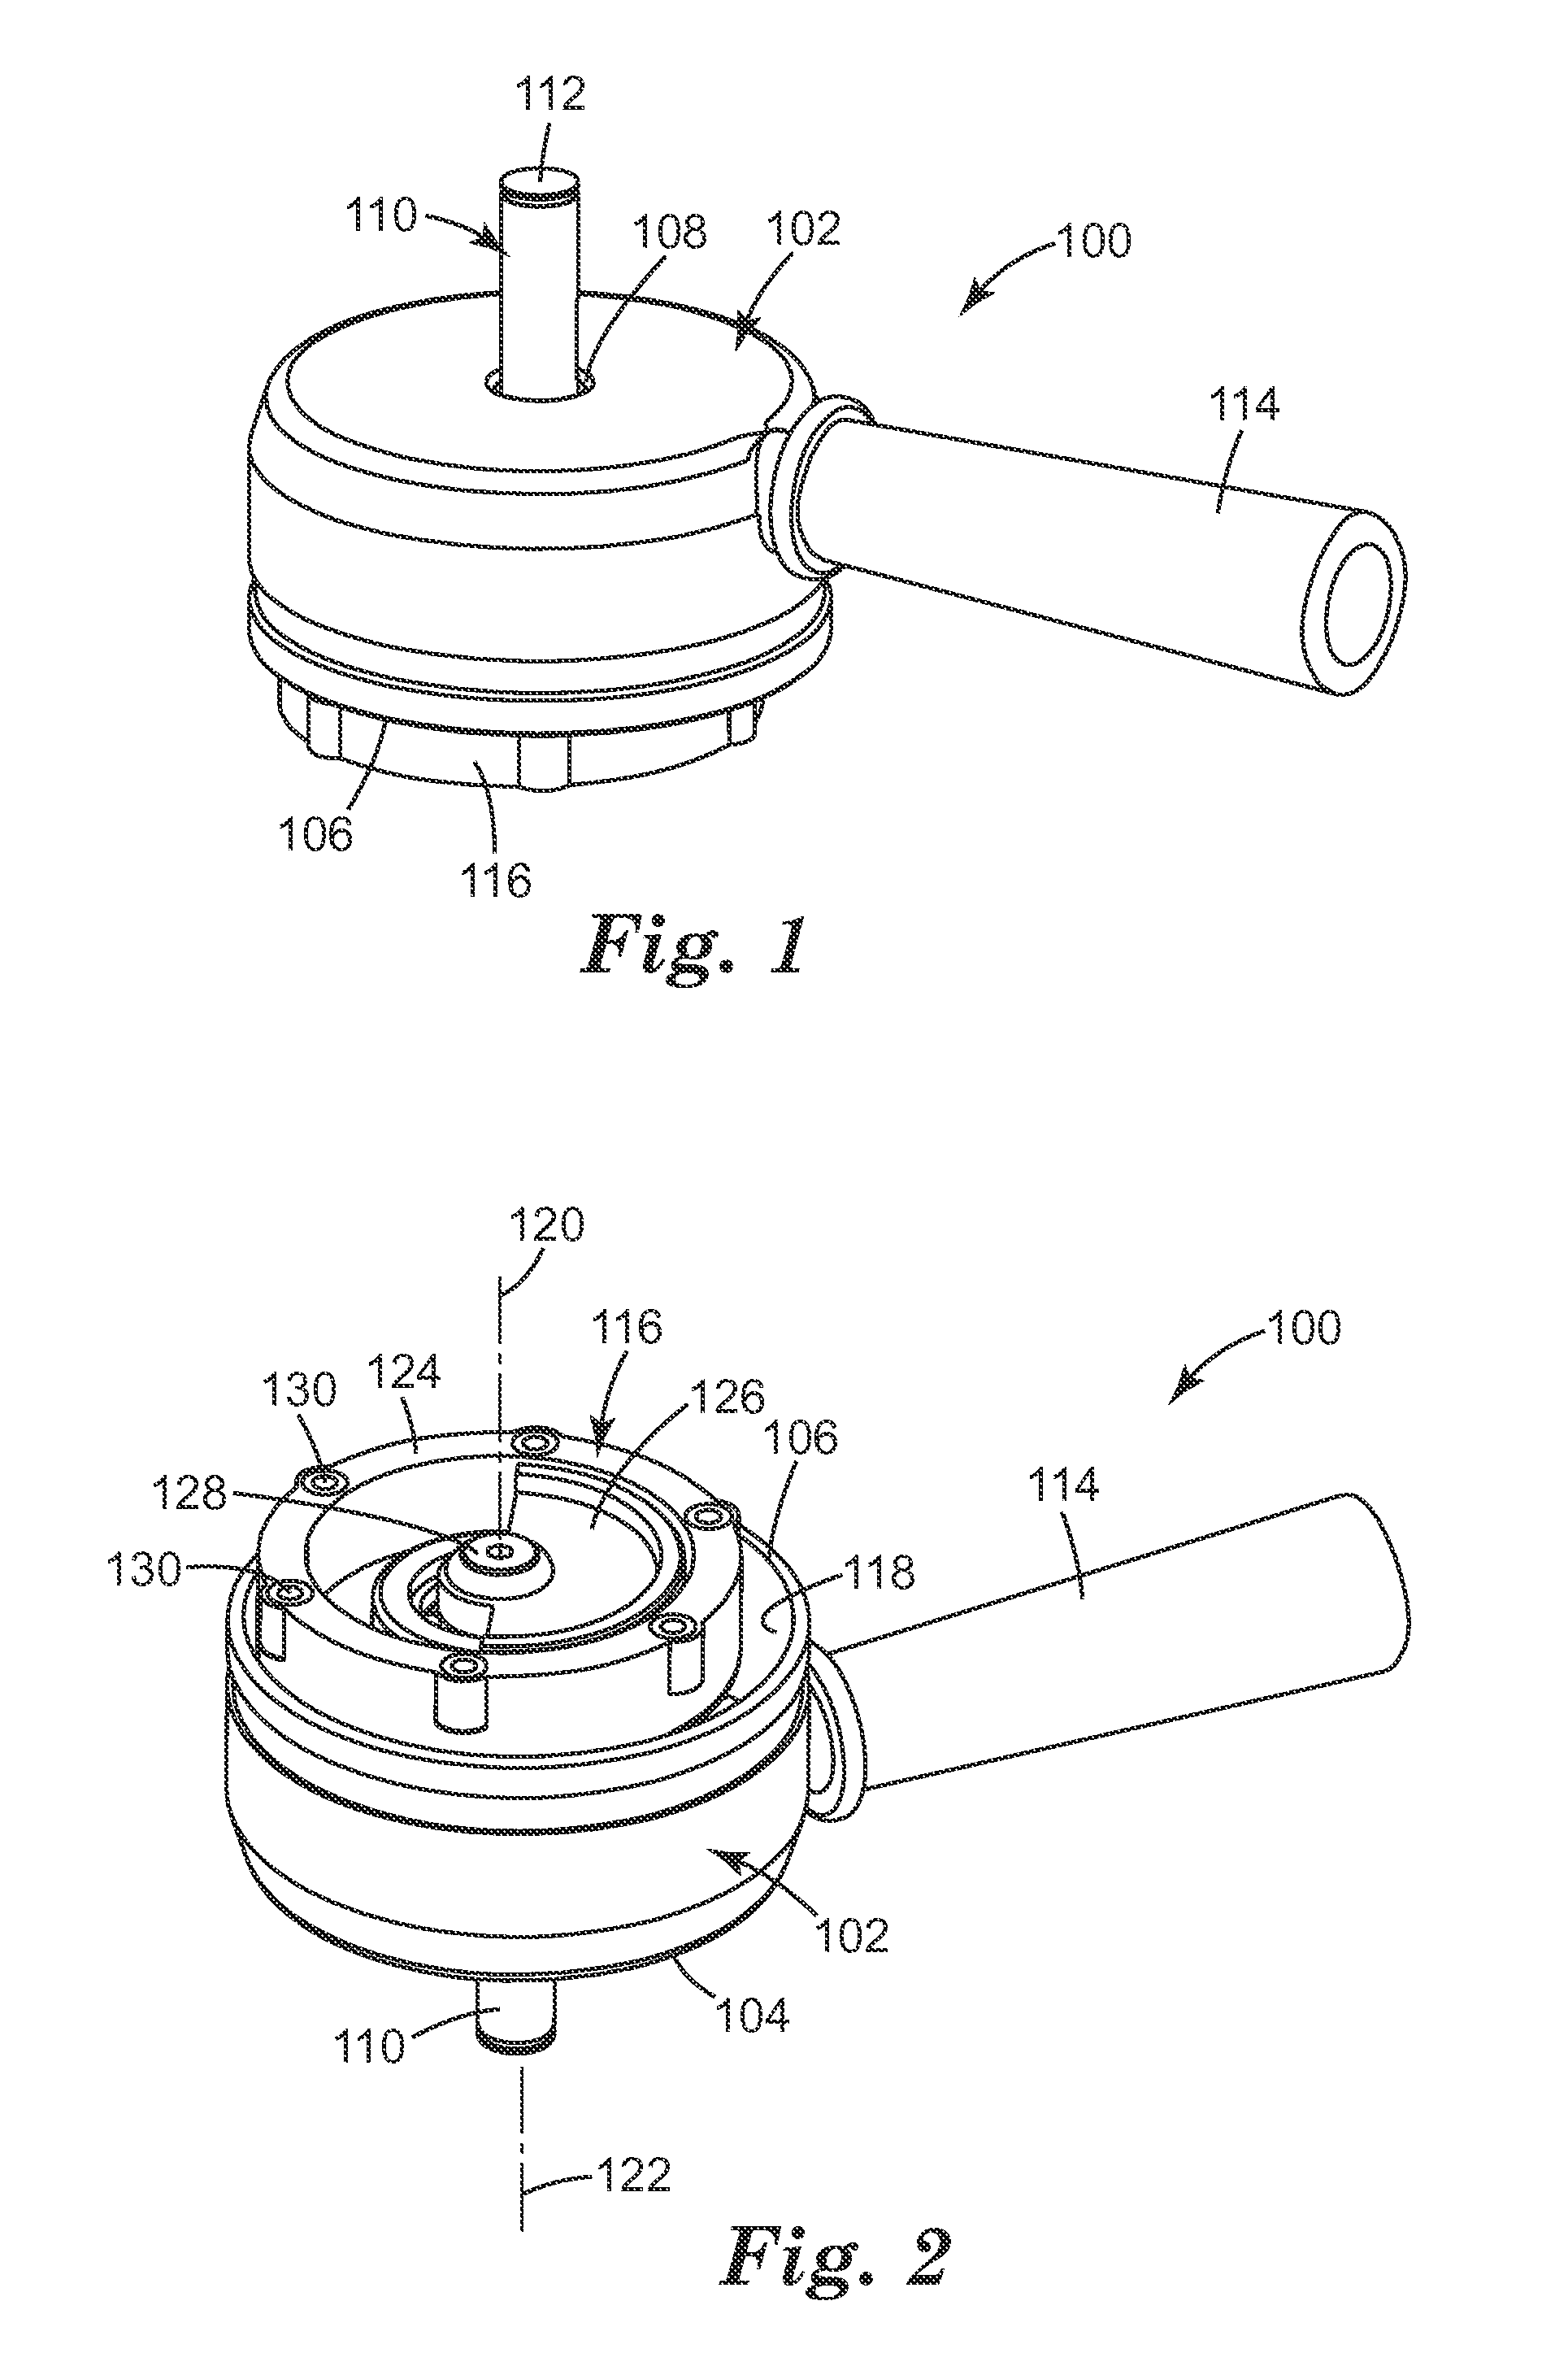 Modular dual-action devices and related methods